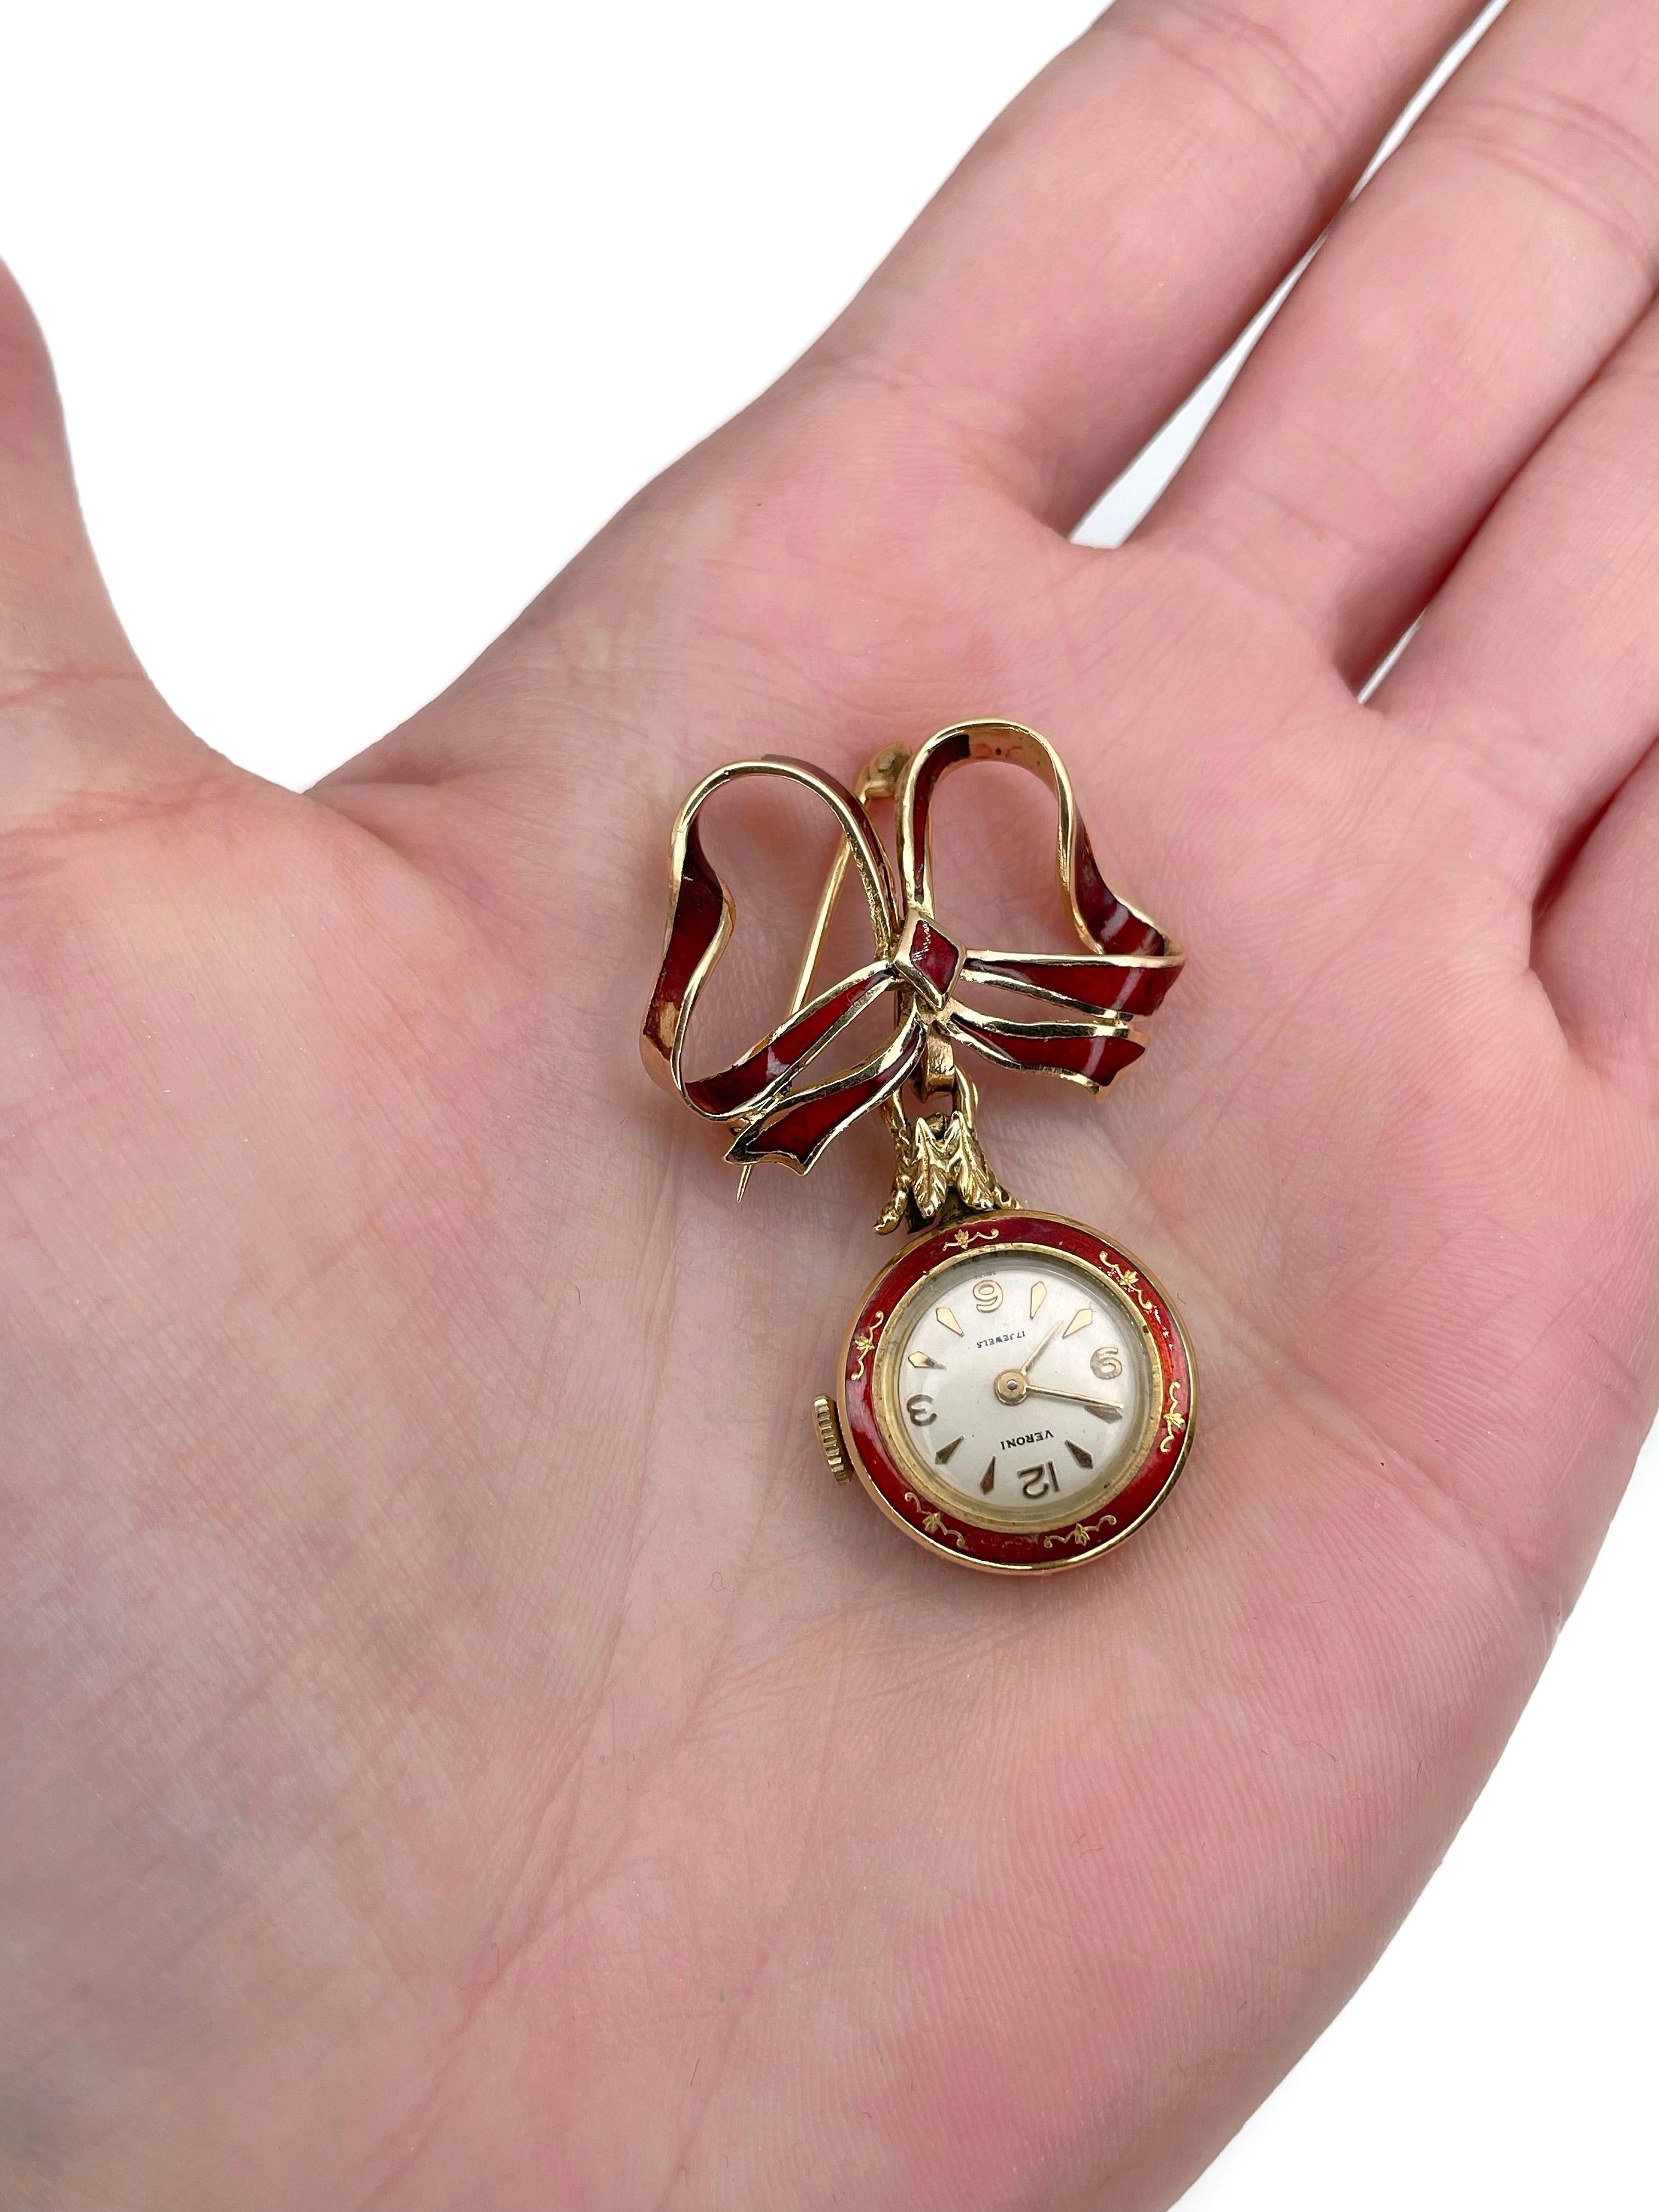 This is an elegant bow brooch with a watch. It is crafted in 18K yellow gold. Circa 1960. 

The piece is adorned with red enamel.
The watch is working. Signed “Veroni. 17 Jewels”

Has a safe closure. 

Weight: 11.68g
Size: 4.5x3cm
Watch diameter: